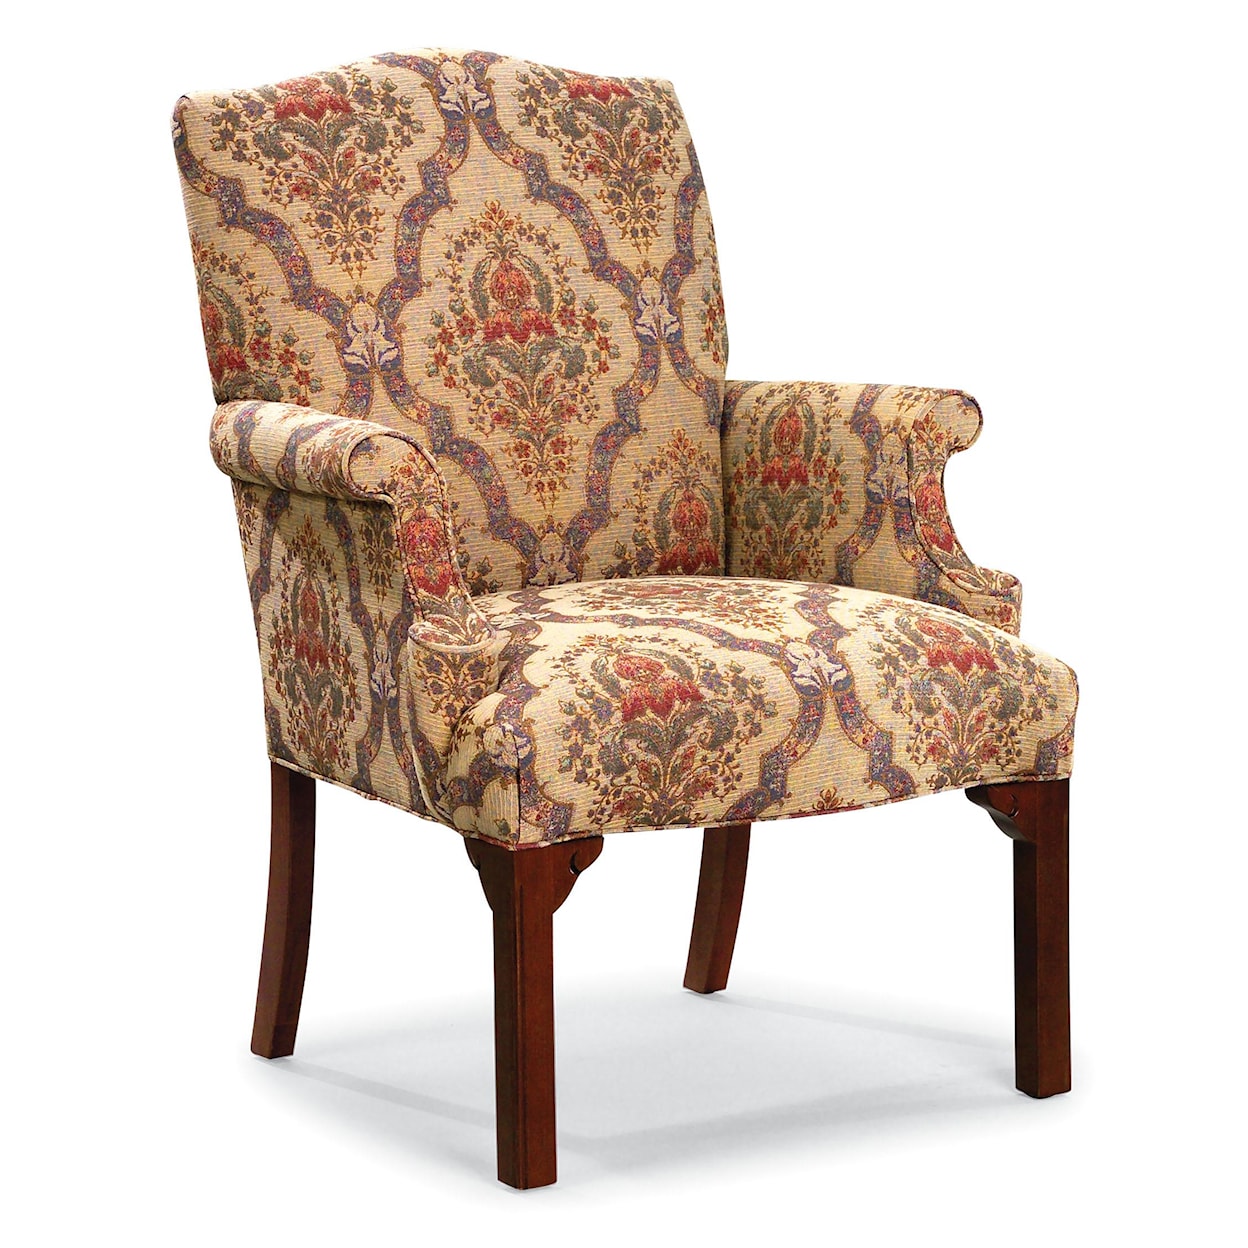 Fairfield Chairs Upholstered Occasional Chair